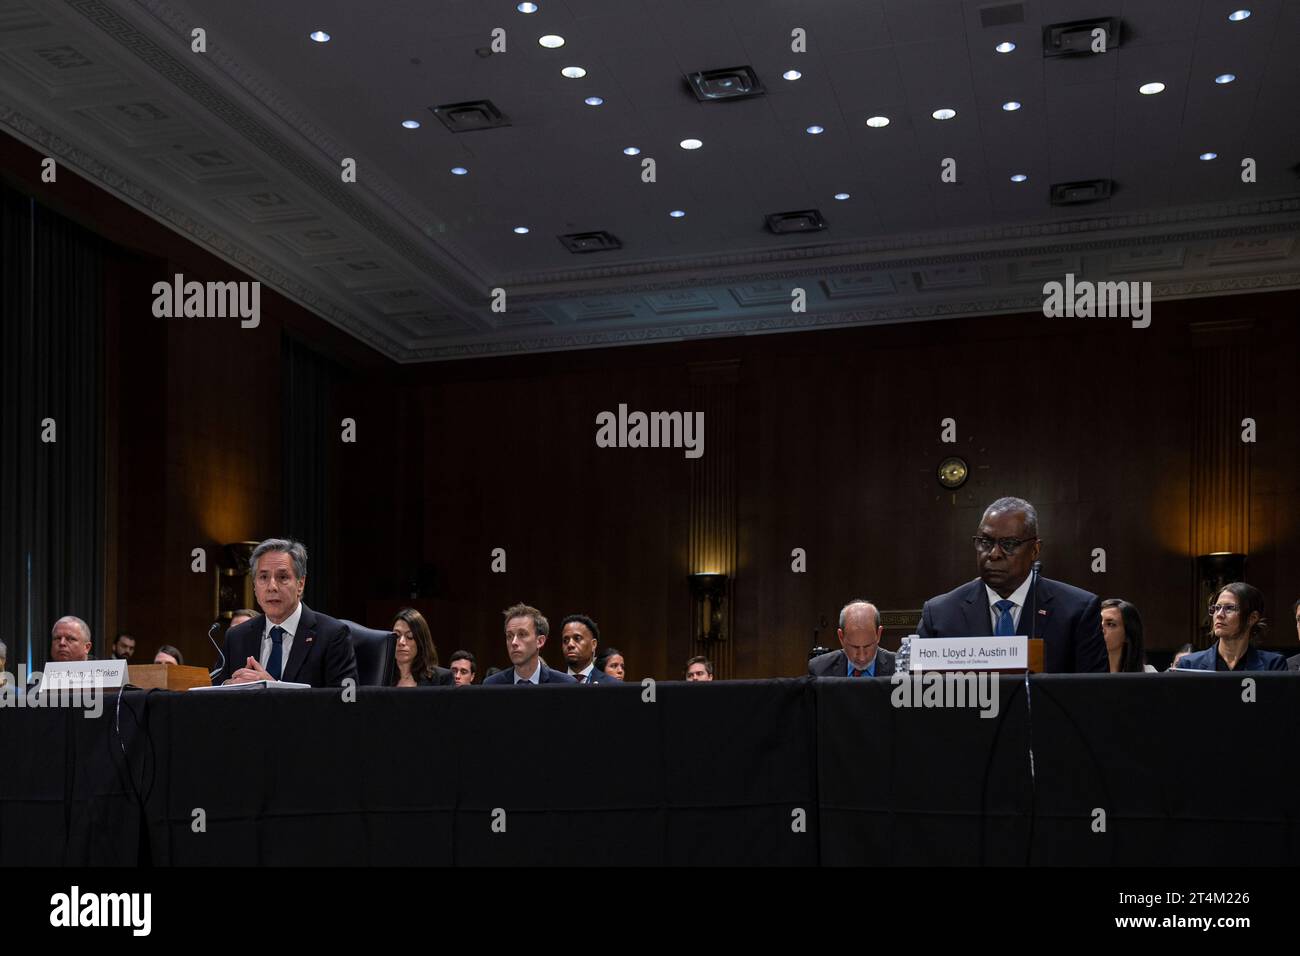 Washington, United States Of America. 31st Oct, 2023. Washington, United States of America. 31 October, 2023. U.S. Secretary of State Tony Blinken, left, and Secretary of Defense Lloyd Austin III, right, testify at the Senate Appropriations Committee hearing on the National Security Supplemental Request at the Dirksen Senate Office Building, October 31, 2023 in Washington, DC Austin testified on the request for emergency funding for Israel and Ukraine. Credit: PO1 Alexander Kubitza/DOD/Alamy Live News Stock Photo